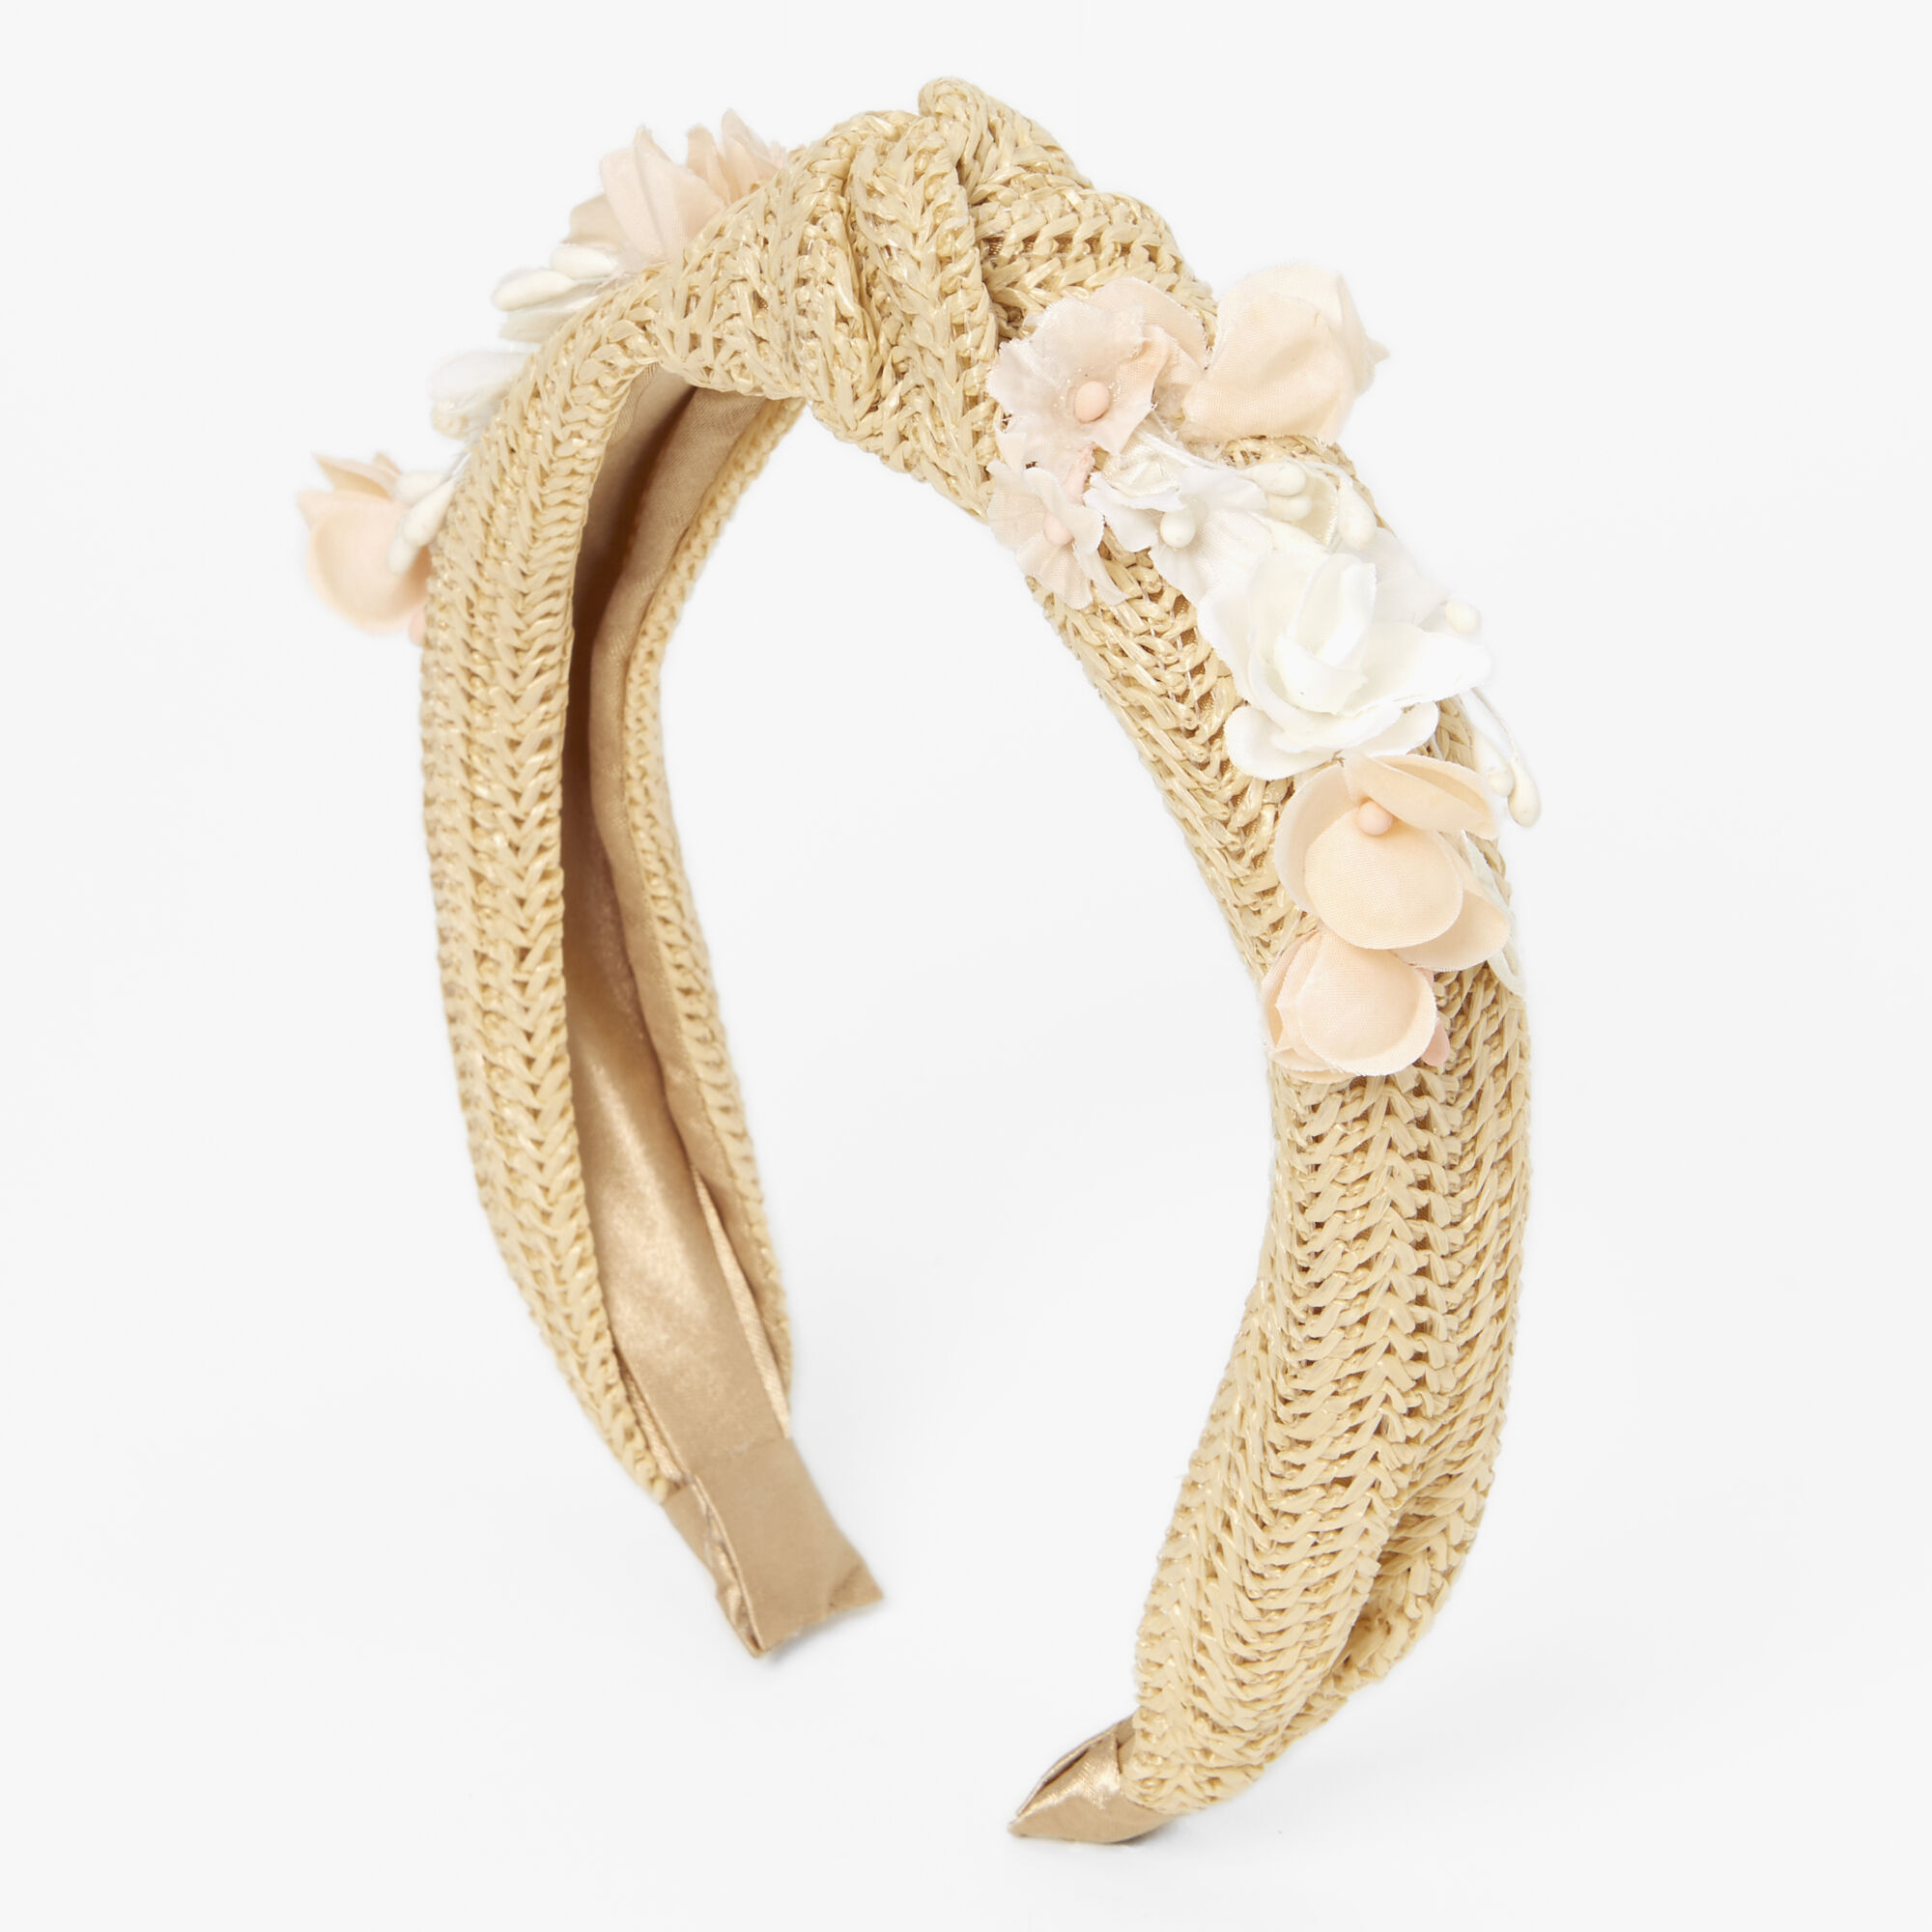 View Claires Raffia Floral Knotted Headband Tan information